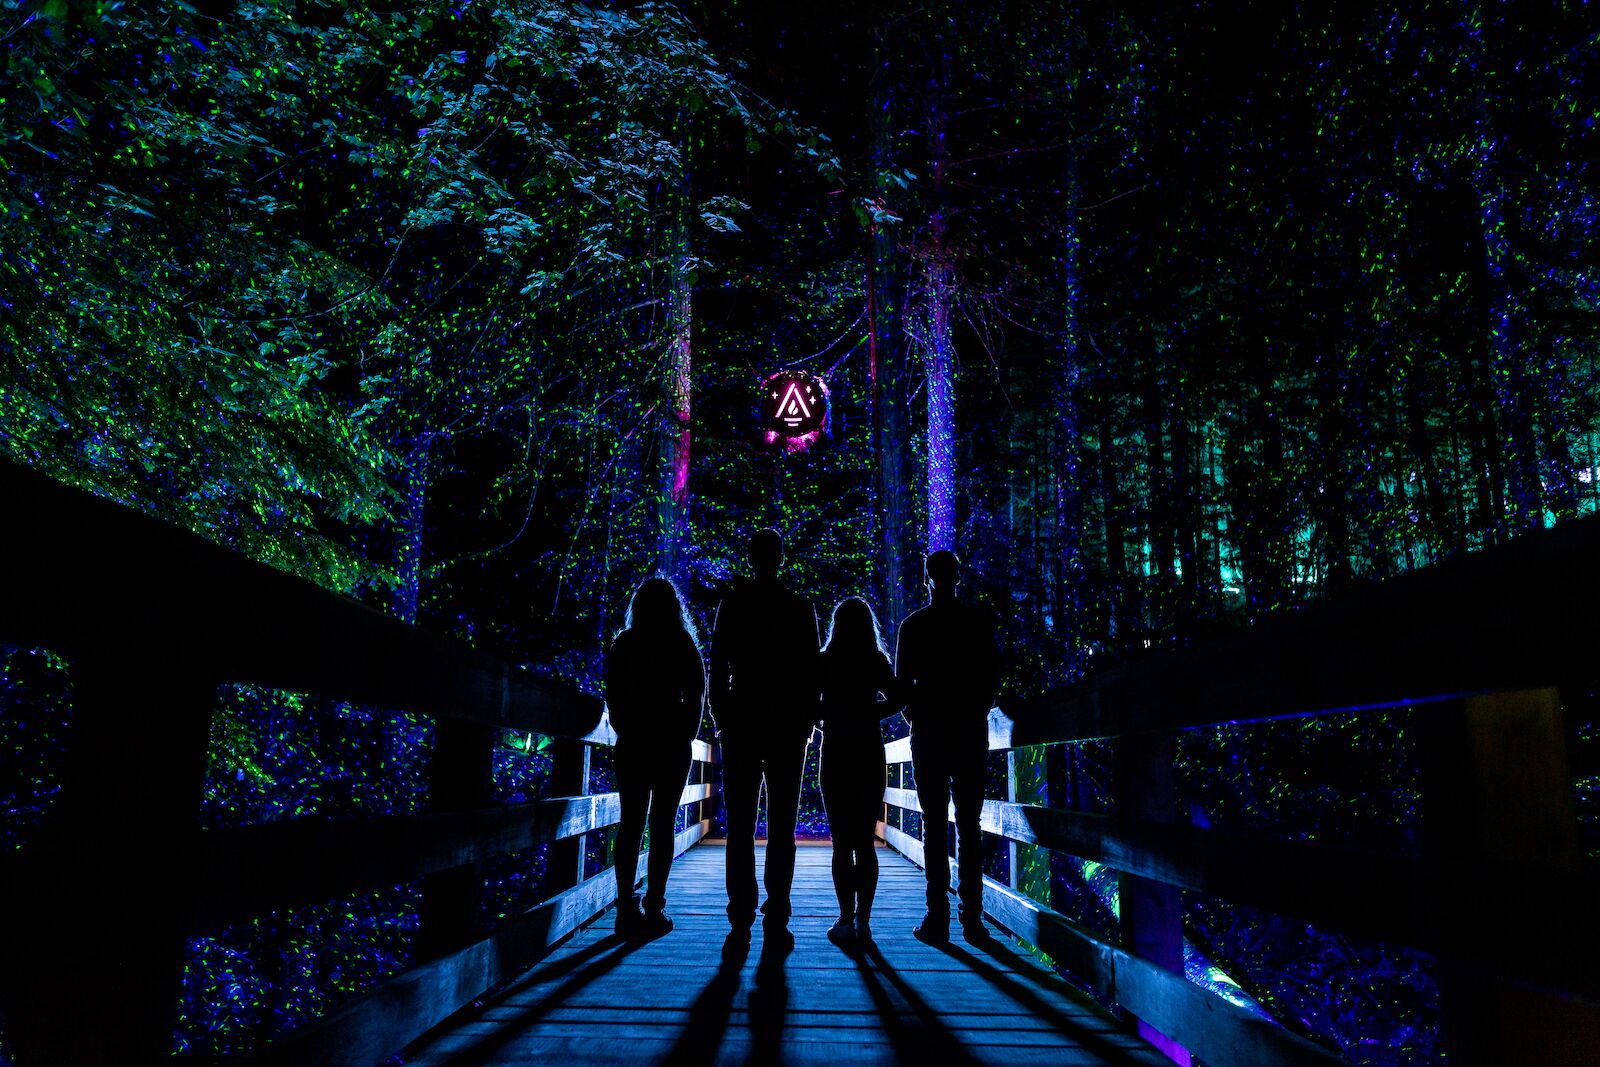 People attending the Vallea Lumina shows in Whistler, Canada